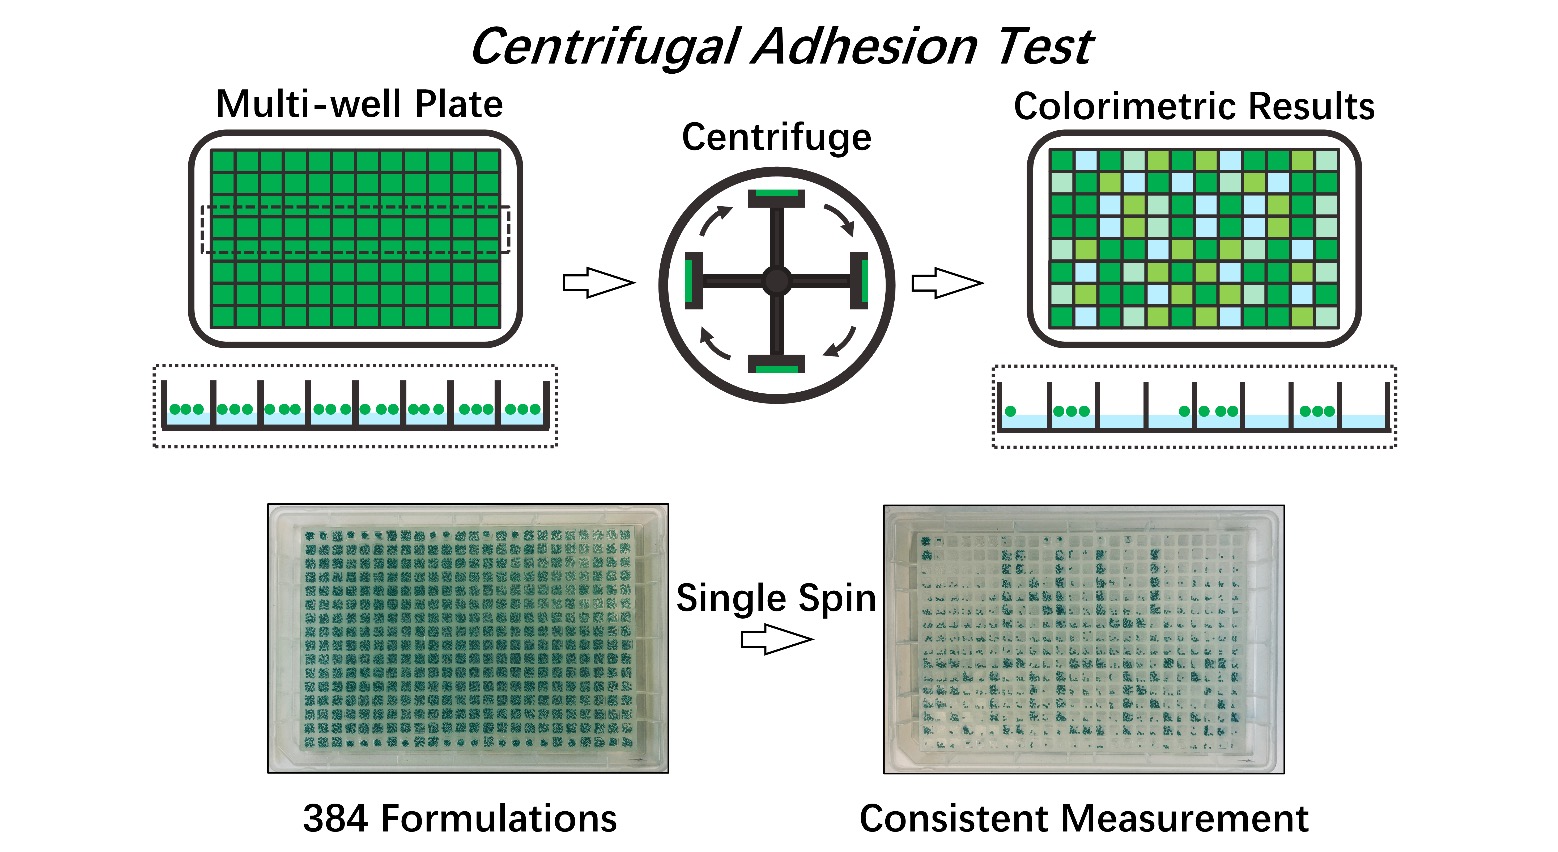 In the experiment, colored microparticles are placed on individual formulations in a multi-well plate, and centrifuged. Stronger adhesives retained more particles. The experiment is demonstrated by displaying a pattern, displayed in stronger formulations within a background of weaker adhesives. 